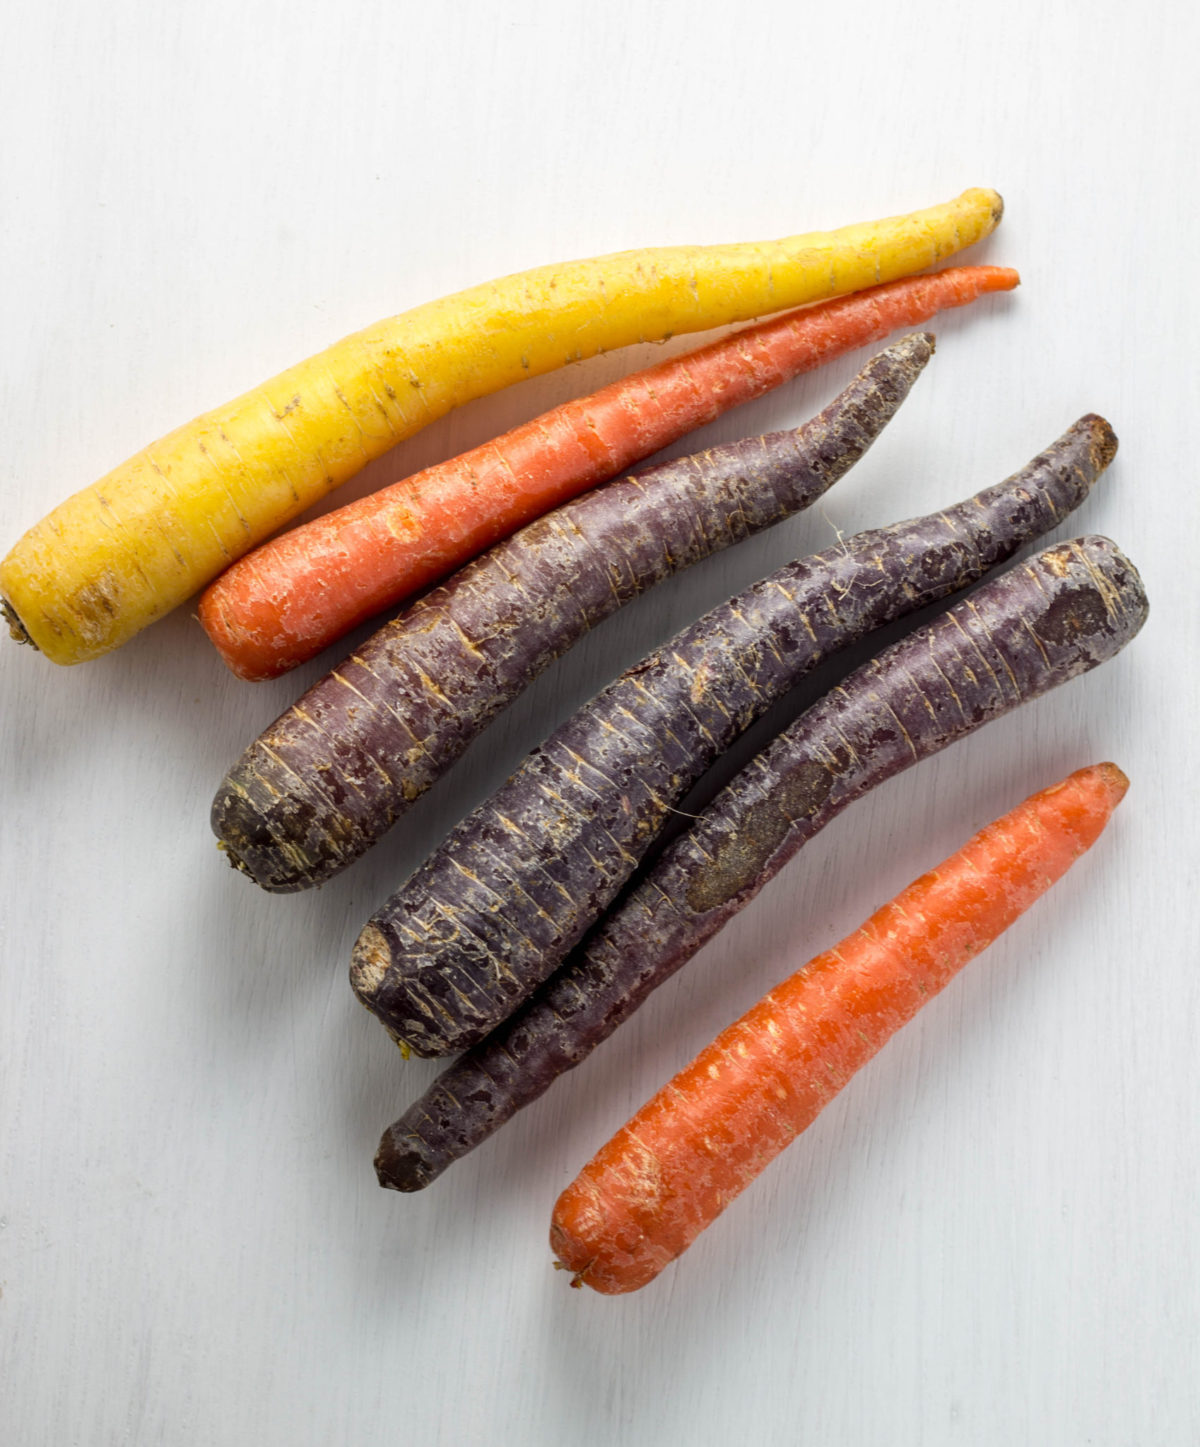 Top view of whole rainbow carrots on a white background.